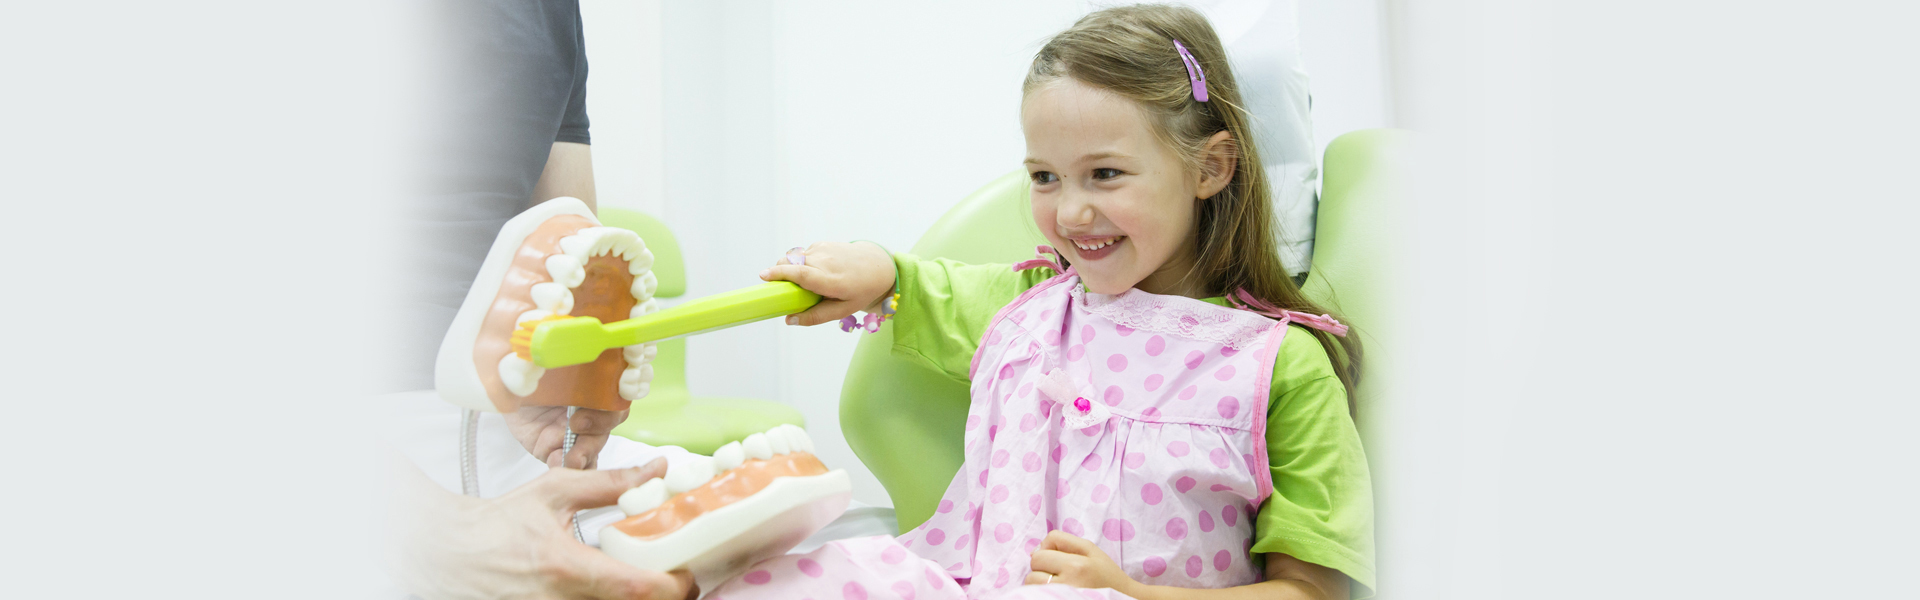 Which Common Children’s Dental Treatment Is Provided by Most Pediatric Dentists